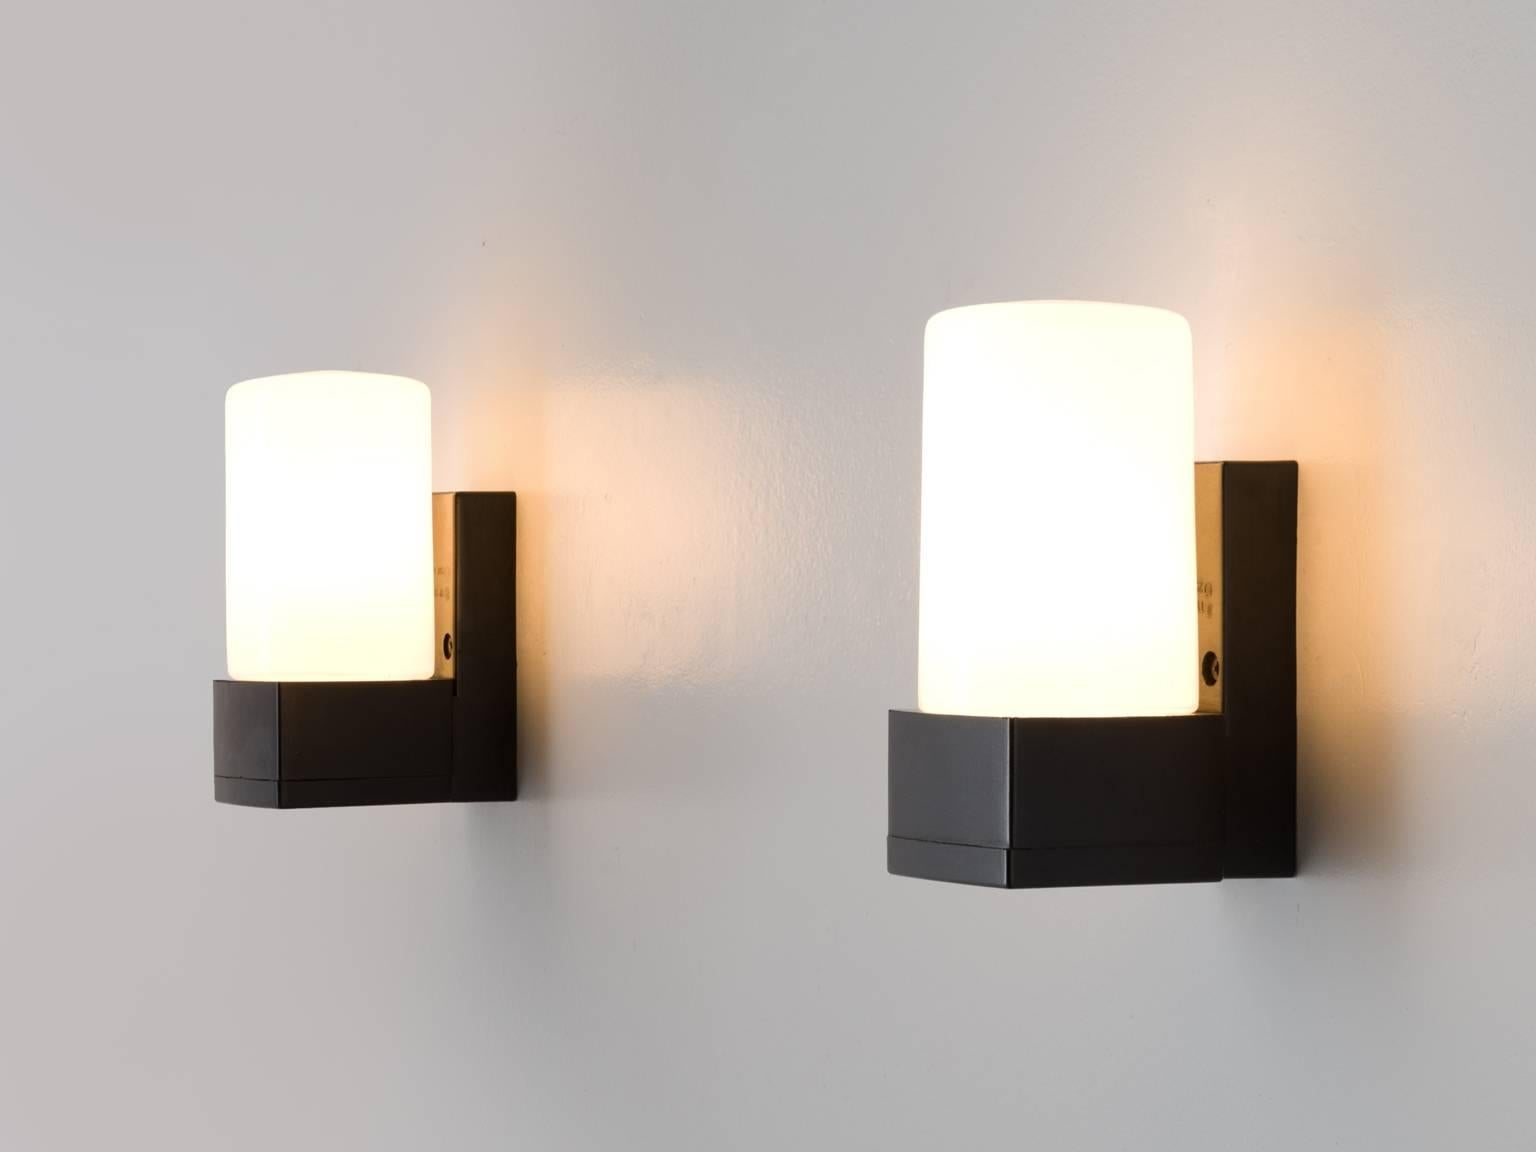 Wall lights, with black frame and opaline light, Europe, 1970s.

This set of wall lights is Minimalist and black and white cylinders. The cylinder is attached with a rectangular block to the wall and holds the opaline cone. The light partition is